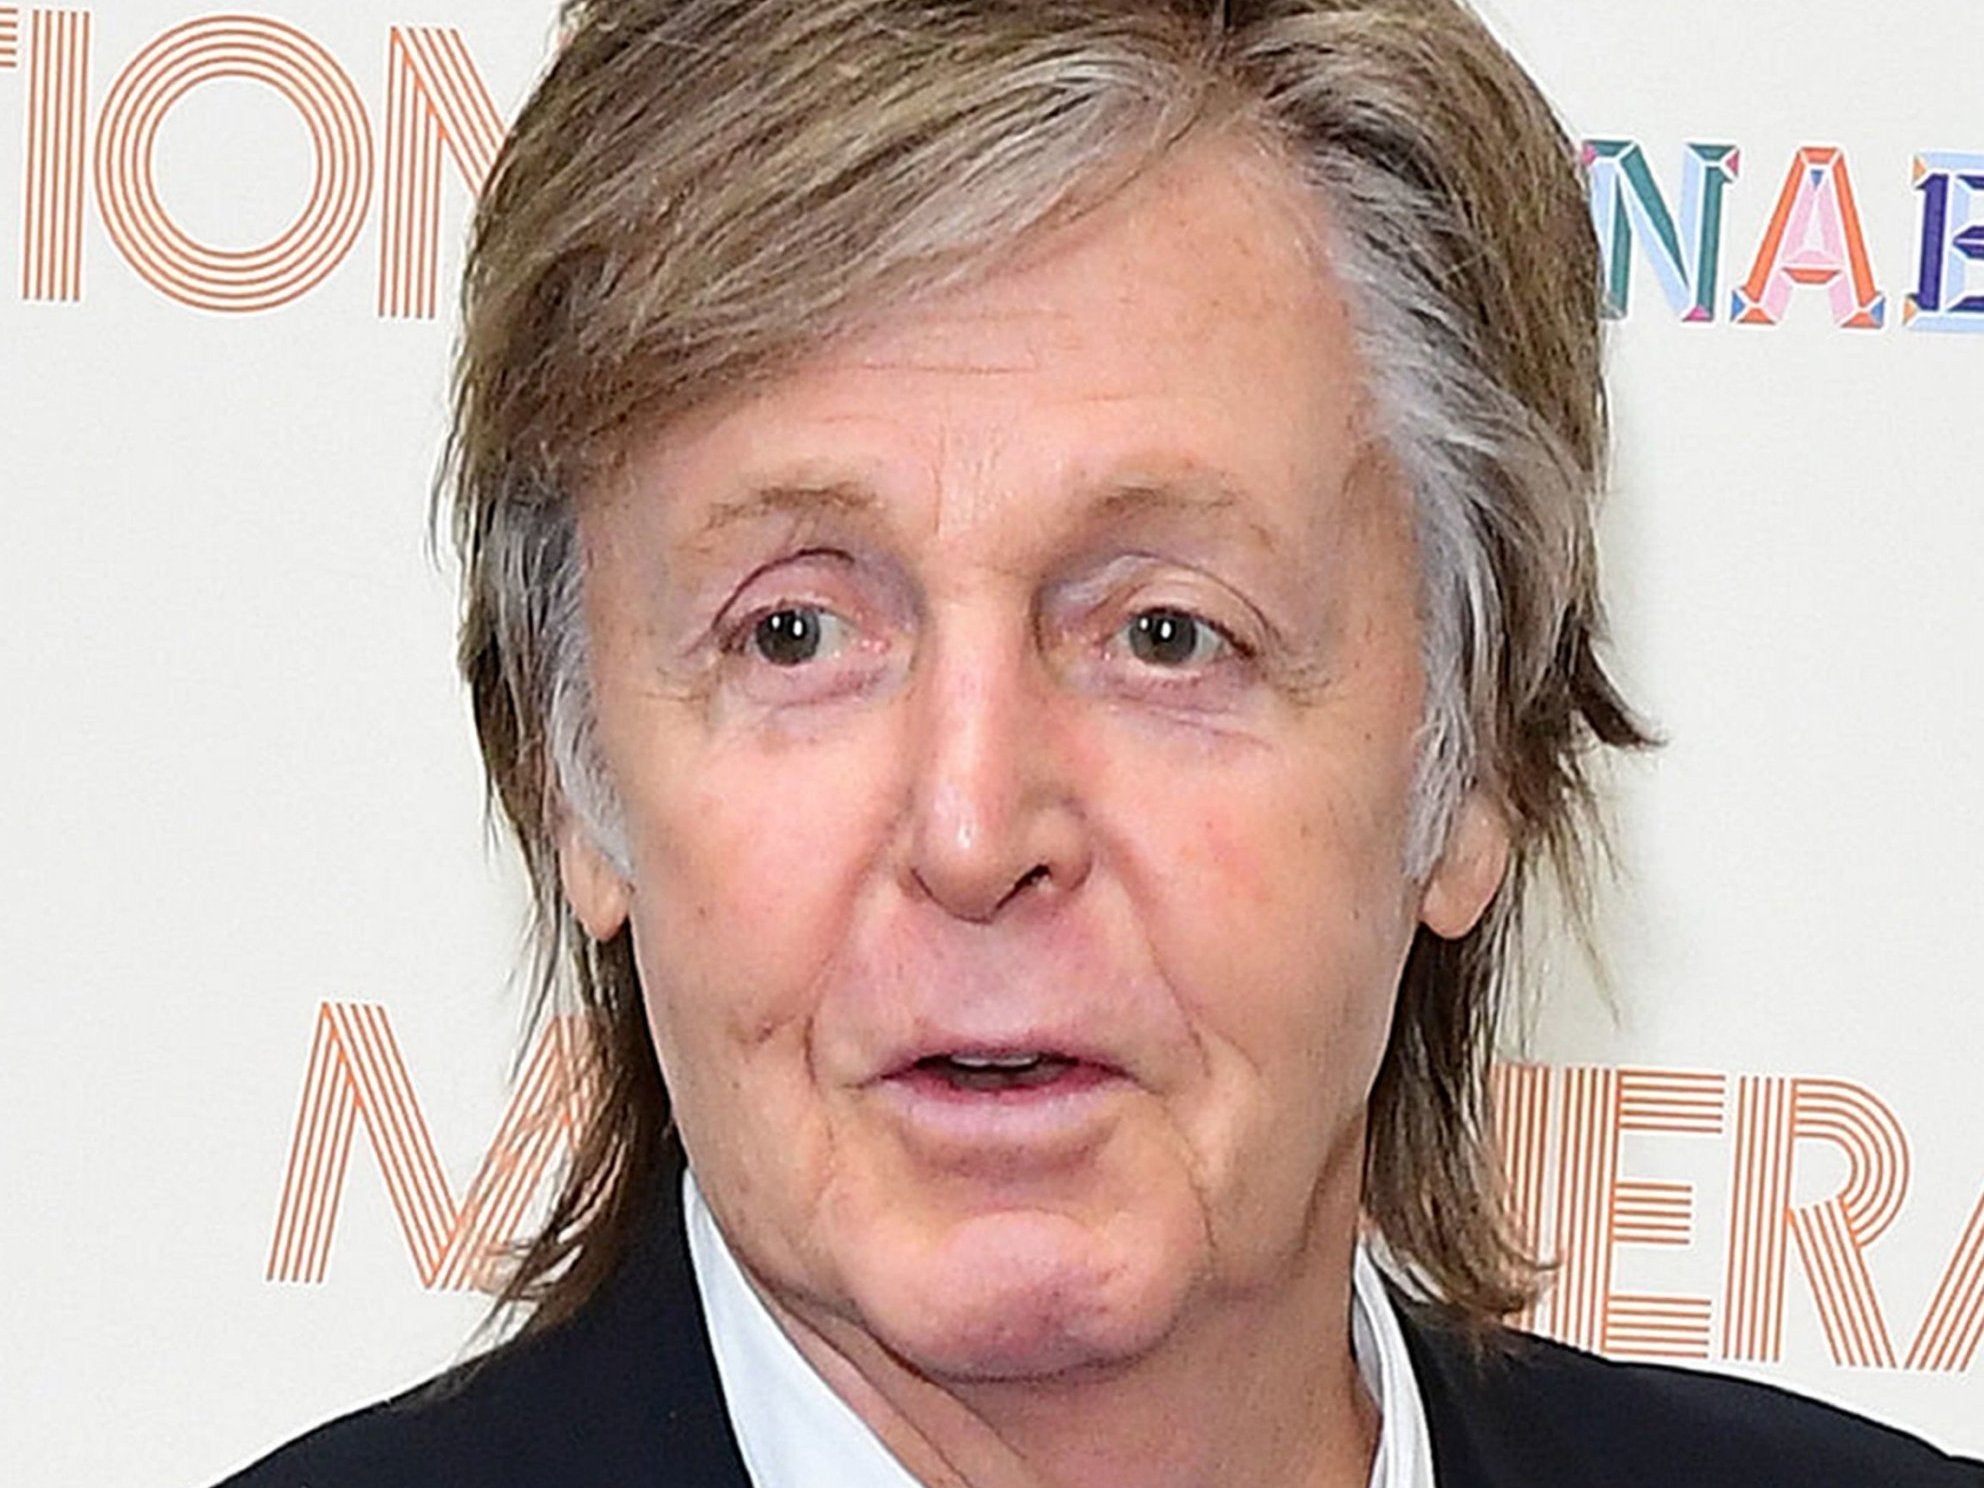 Sir Paul McCartney revealed the criticism was included in lyrics to a song on his new album